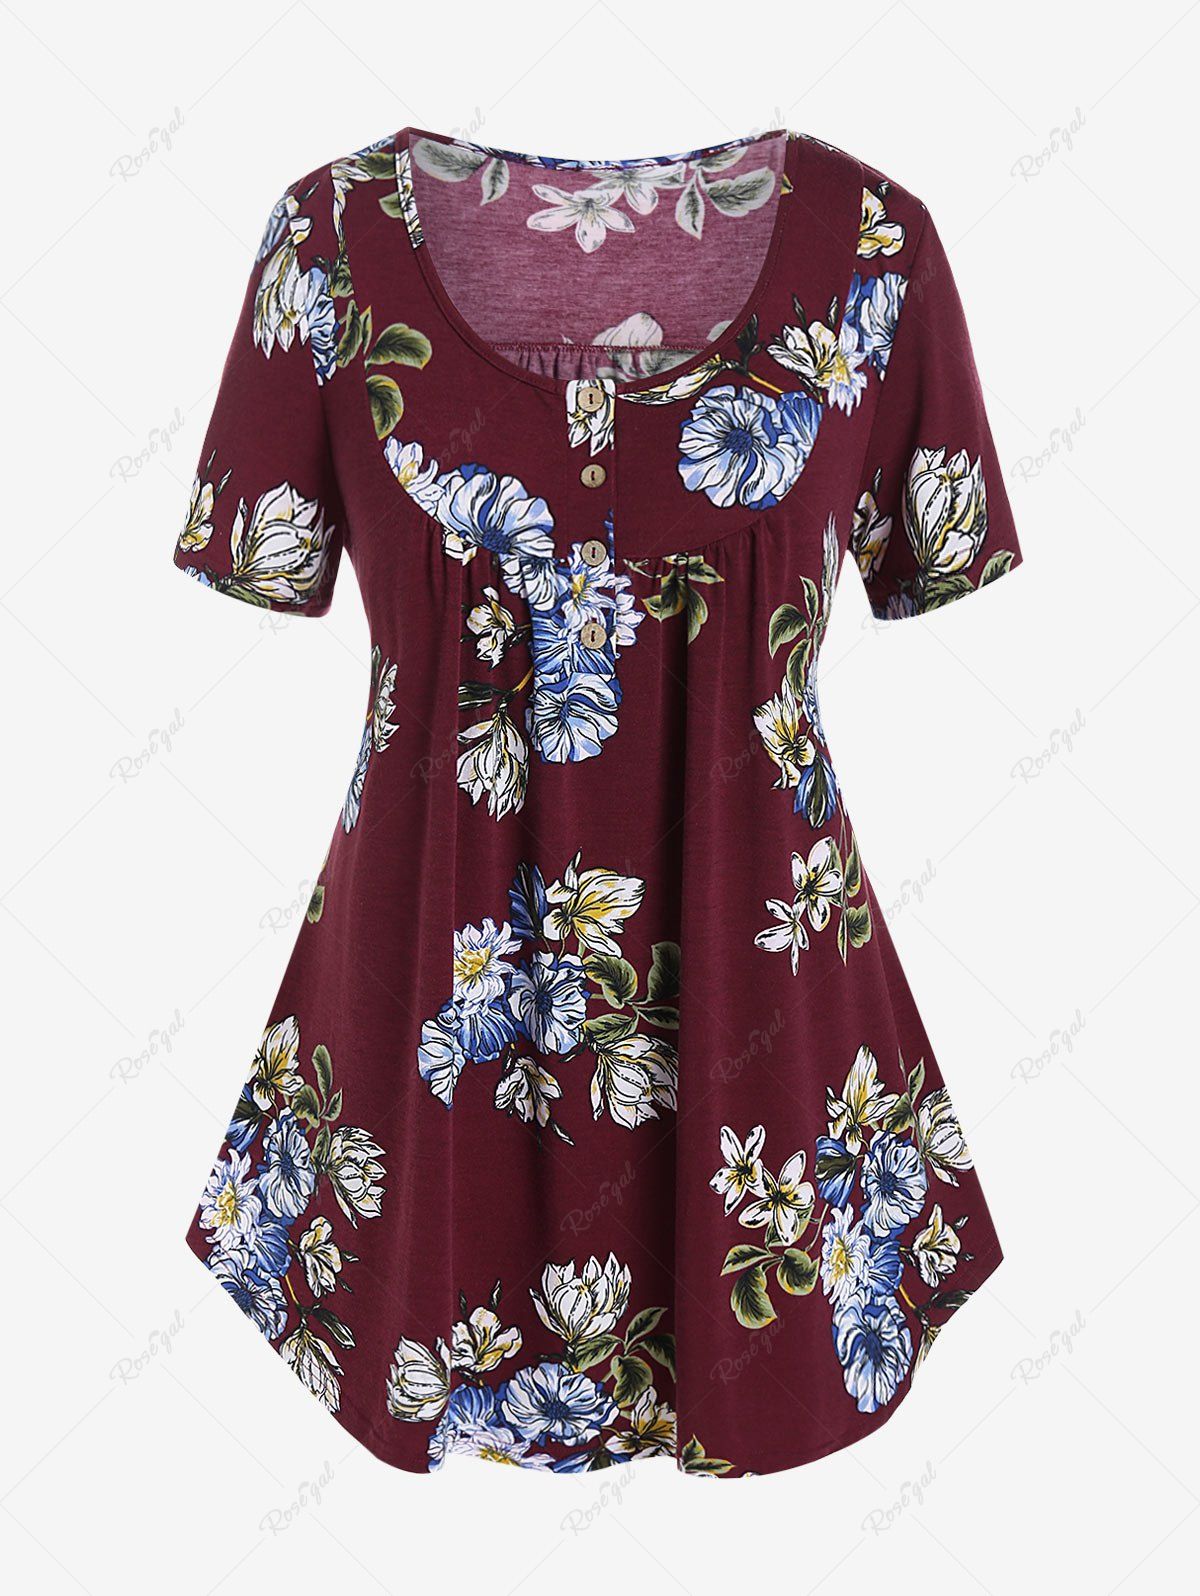 Fancy Plus Size Floral Scoop Neck Tunic Tee  